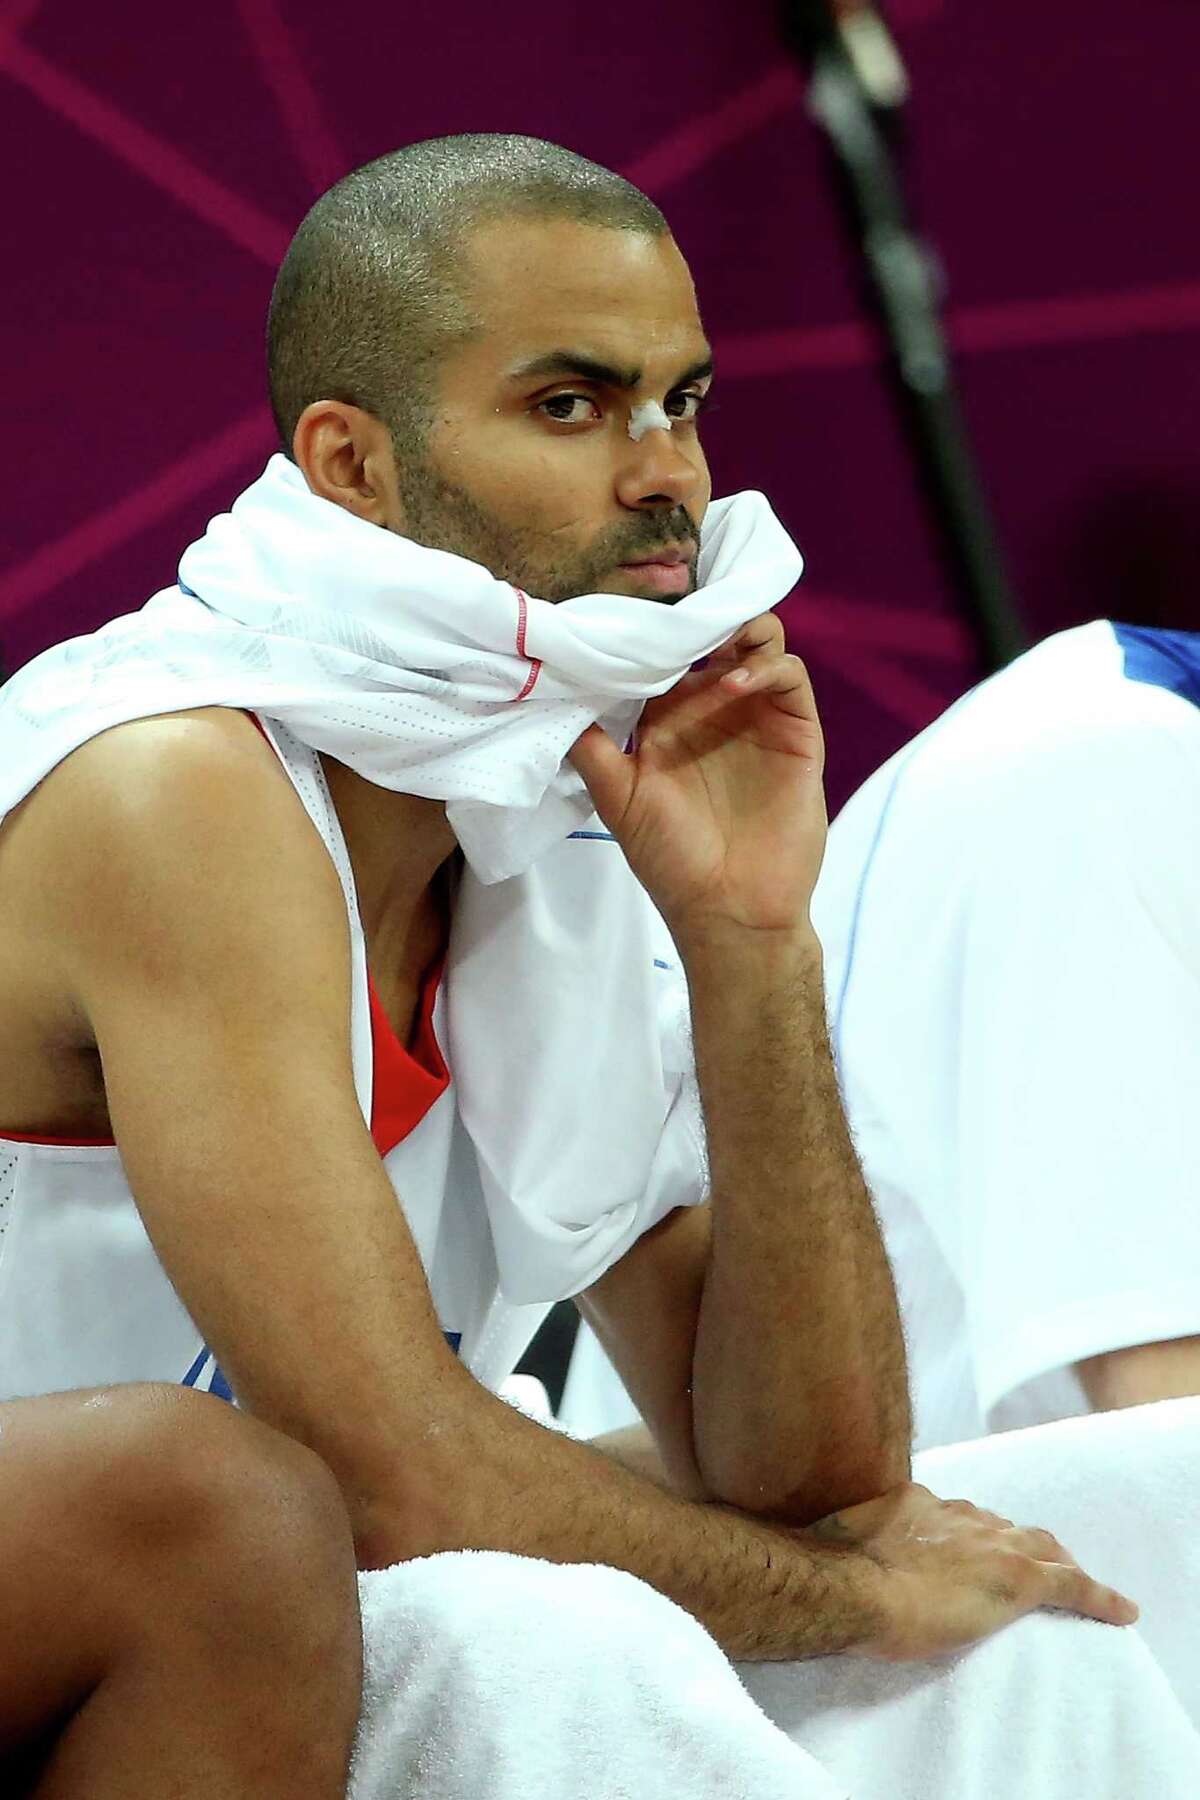 LONDON, ENGLAND - AUGUST 06: Tony Parker of France looks on form the bench in the second half against Nigeria during the Men's Basketball Preliminary Round match on Day 10 of the London 2012 Olympic Games at the Basketball Arena on August 6, 2012 in London, England. France won 79-73.